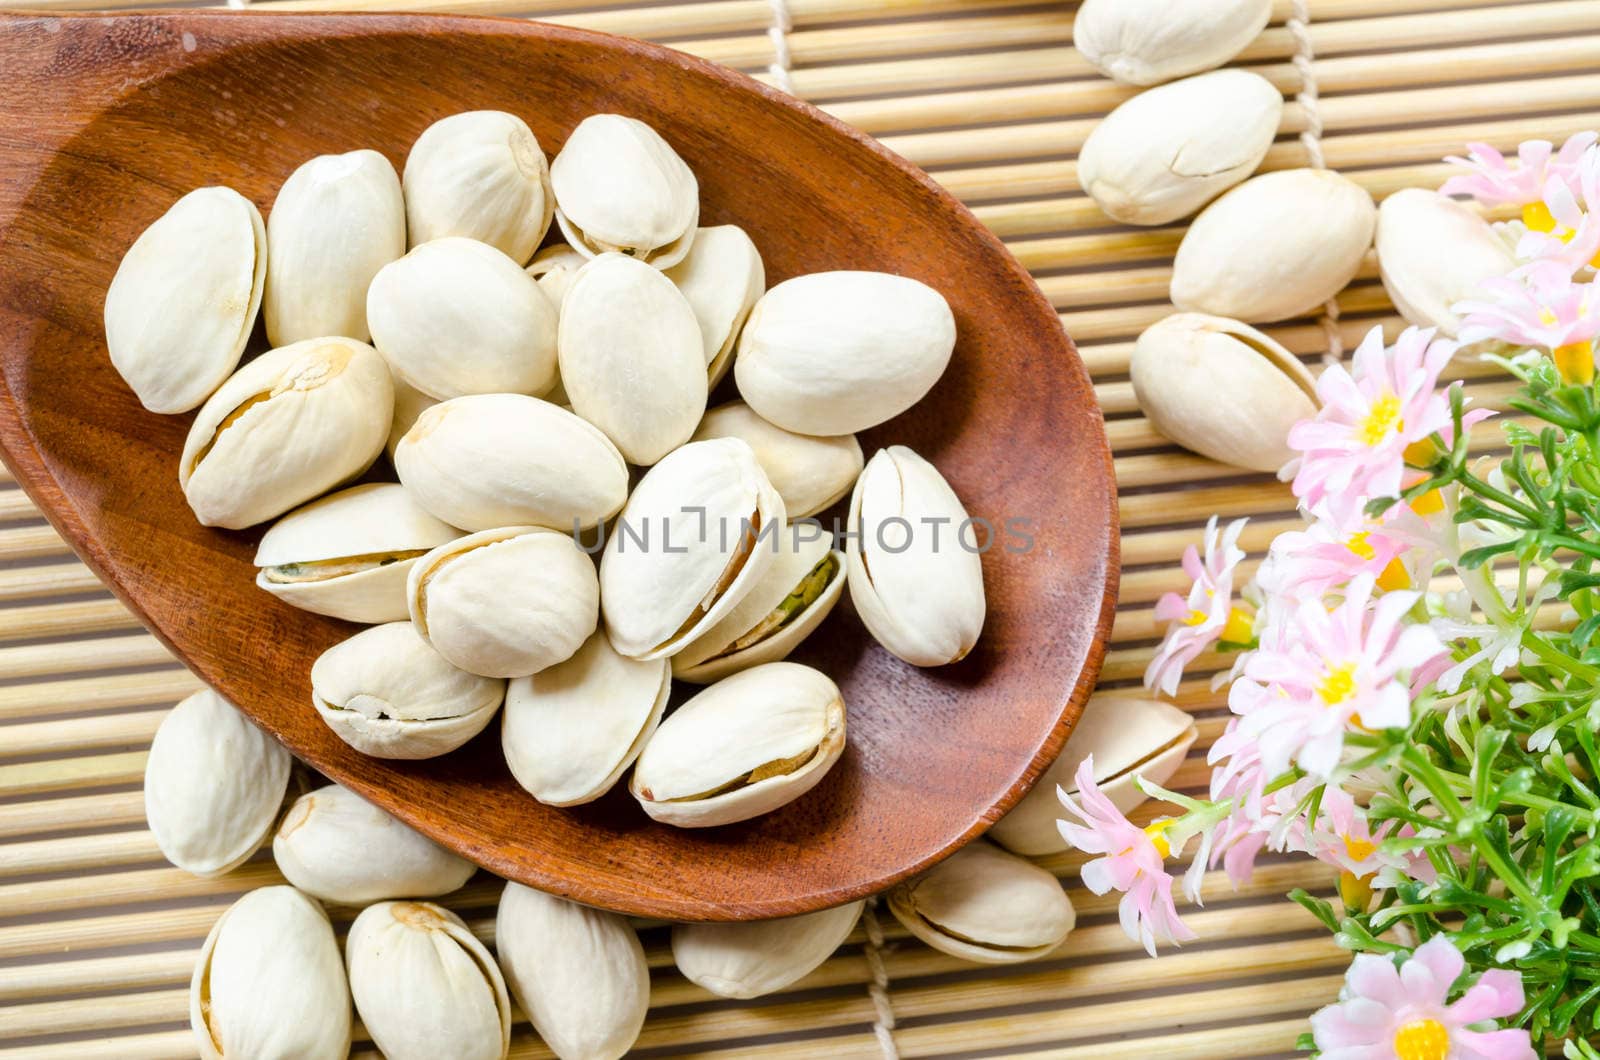 Roasted pistachios in wooden spoon and milk in glass with flower on mat wooden background.